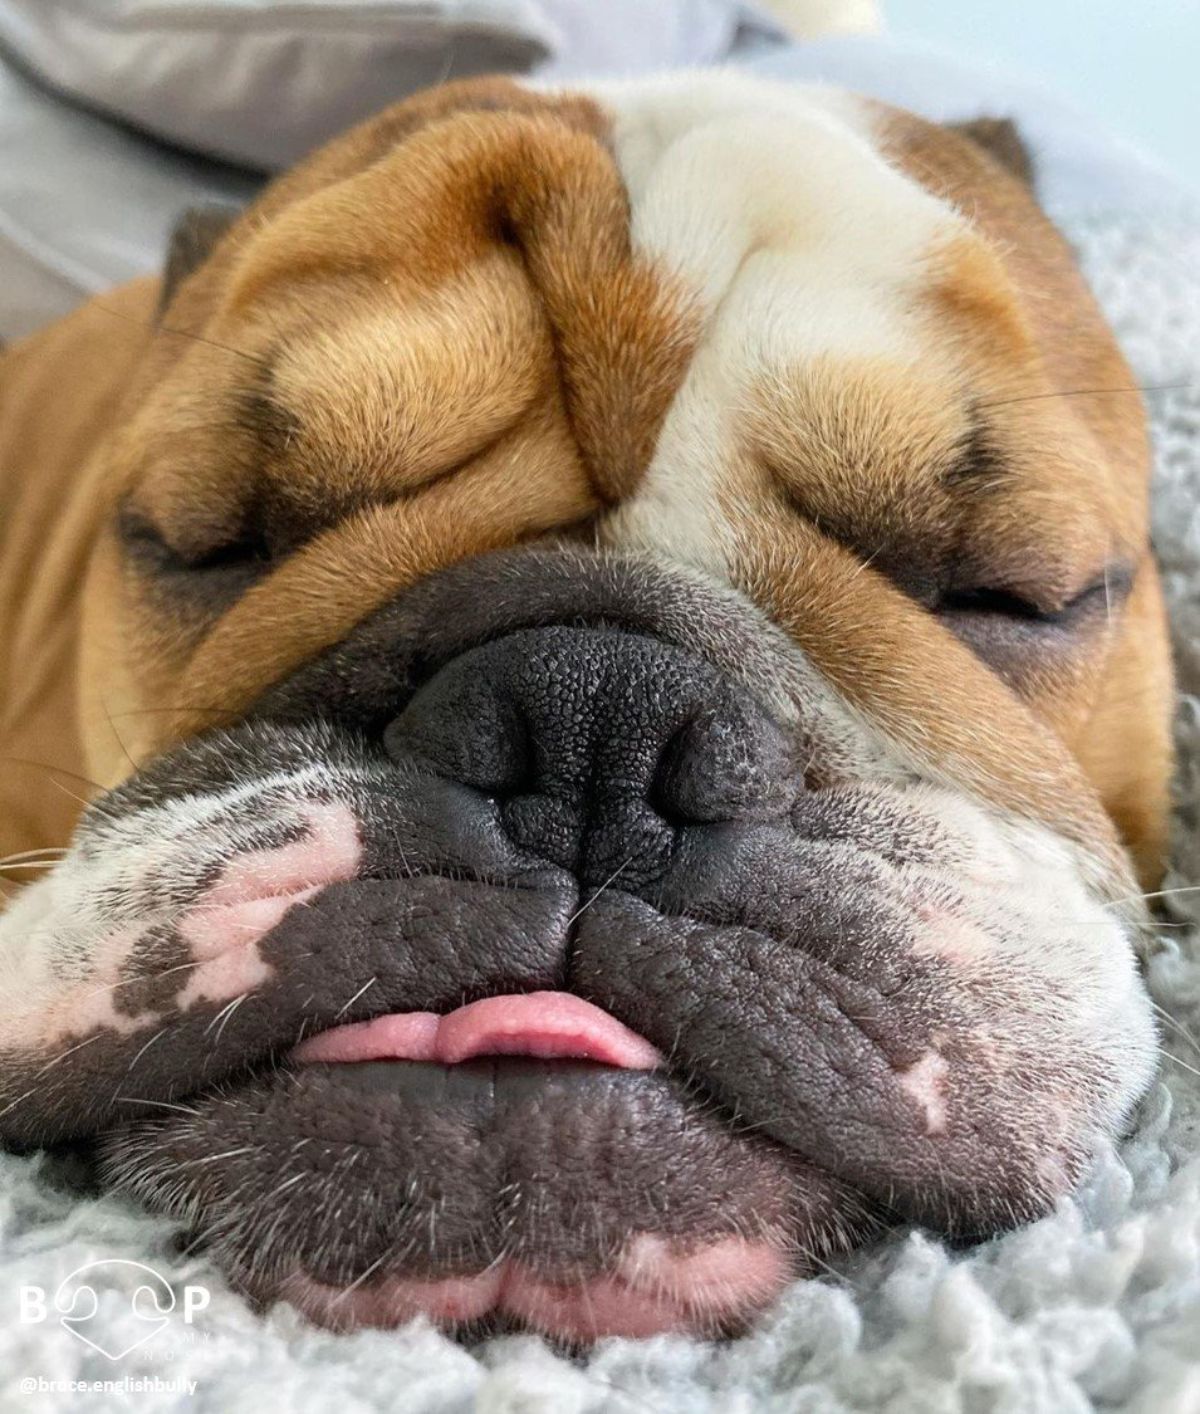 close up of sleeping brown and white bulldog's face